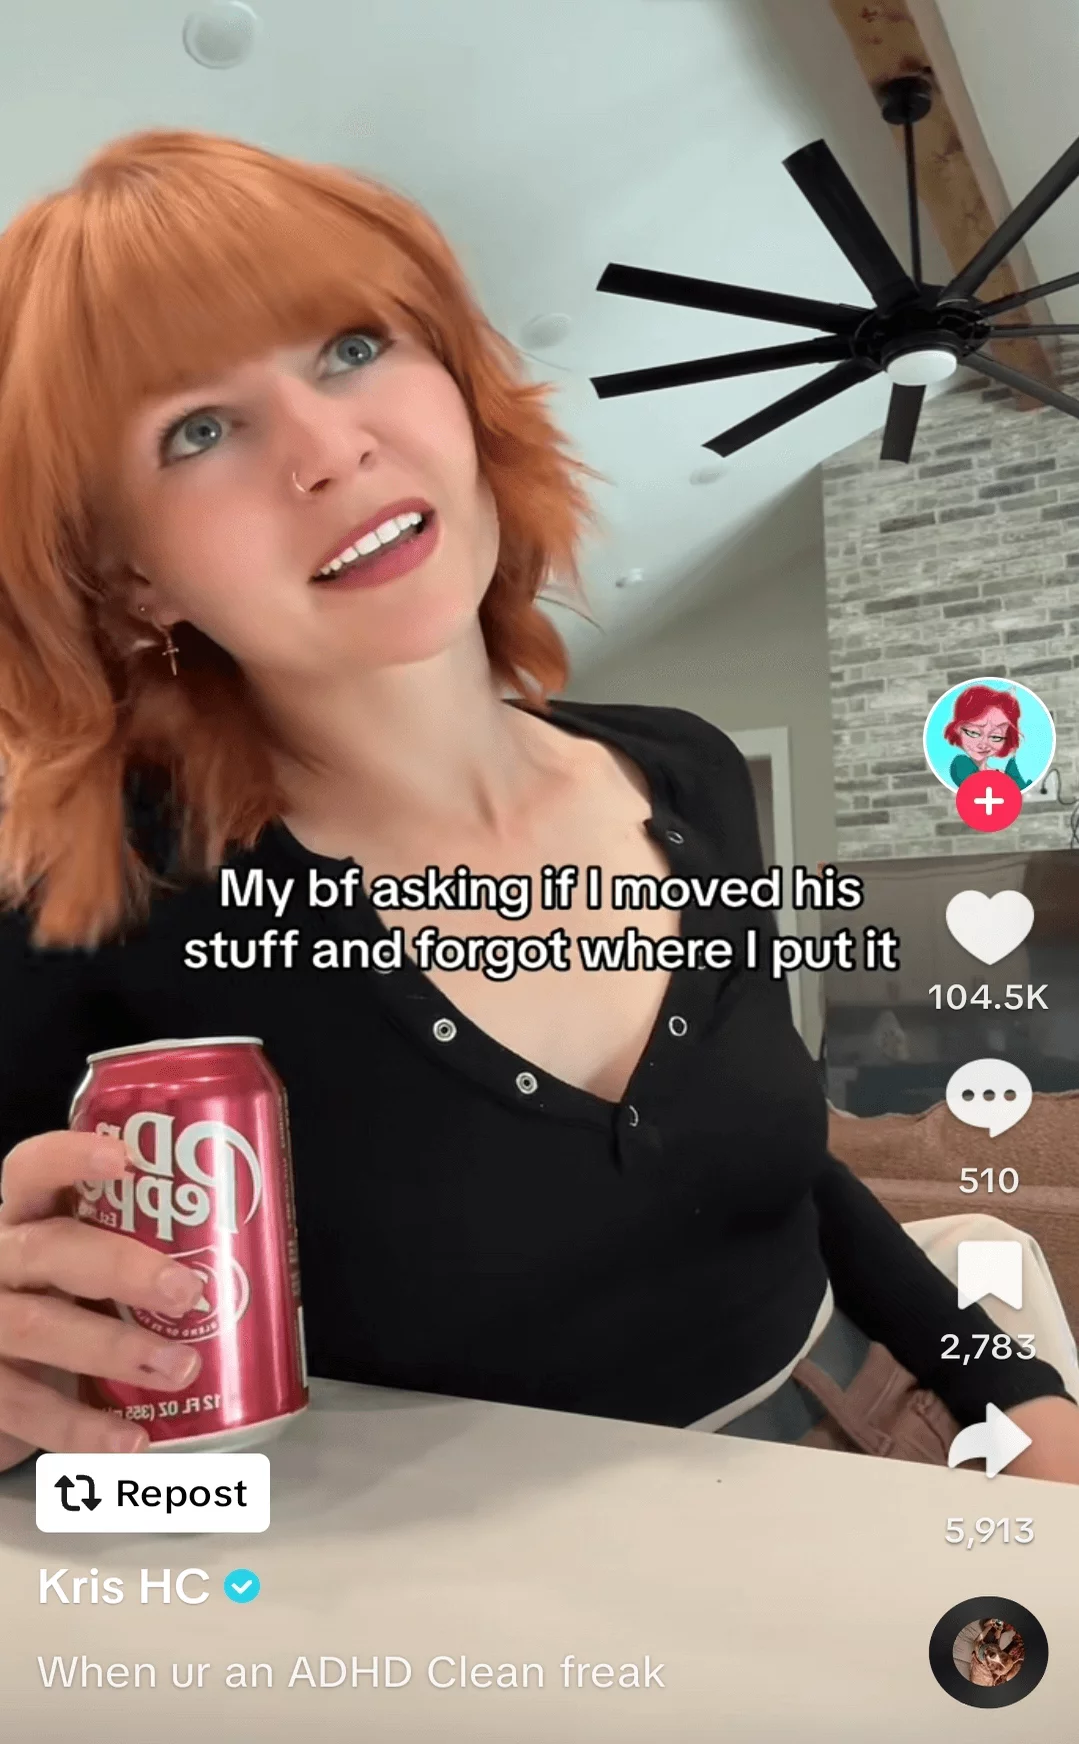 Woman with red hair holding a soda can, making a playful expression in her modern kitchen, featured in a social media post.